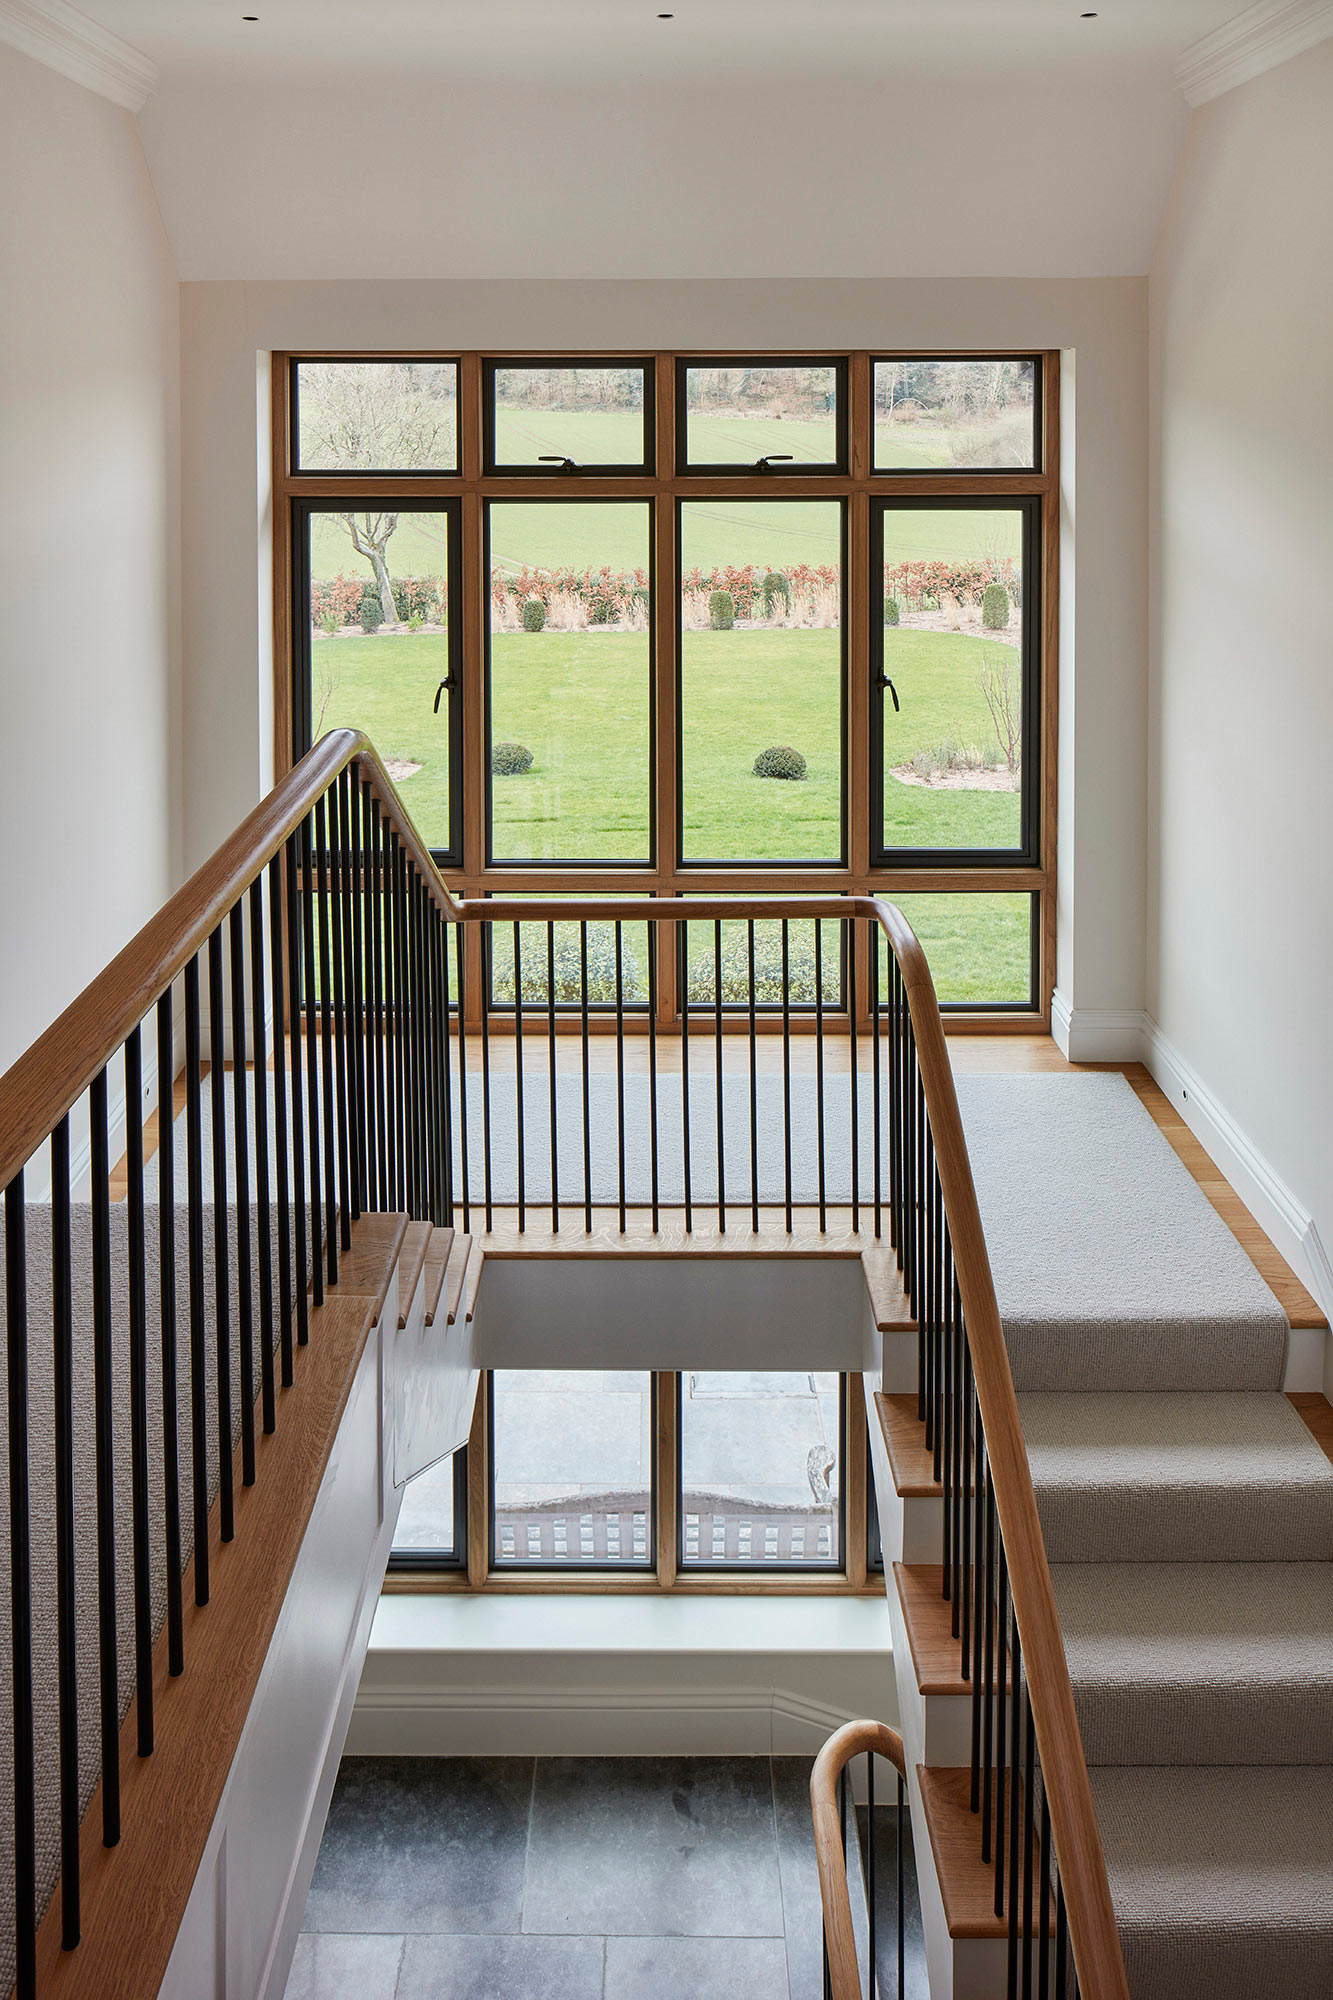 Stairwell - New build by KM Grant Surrey